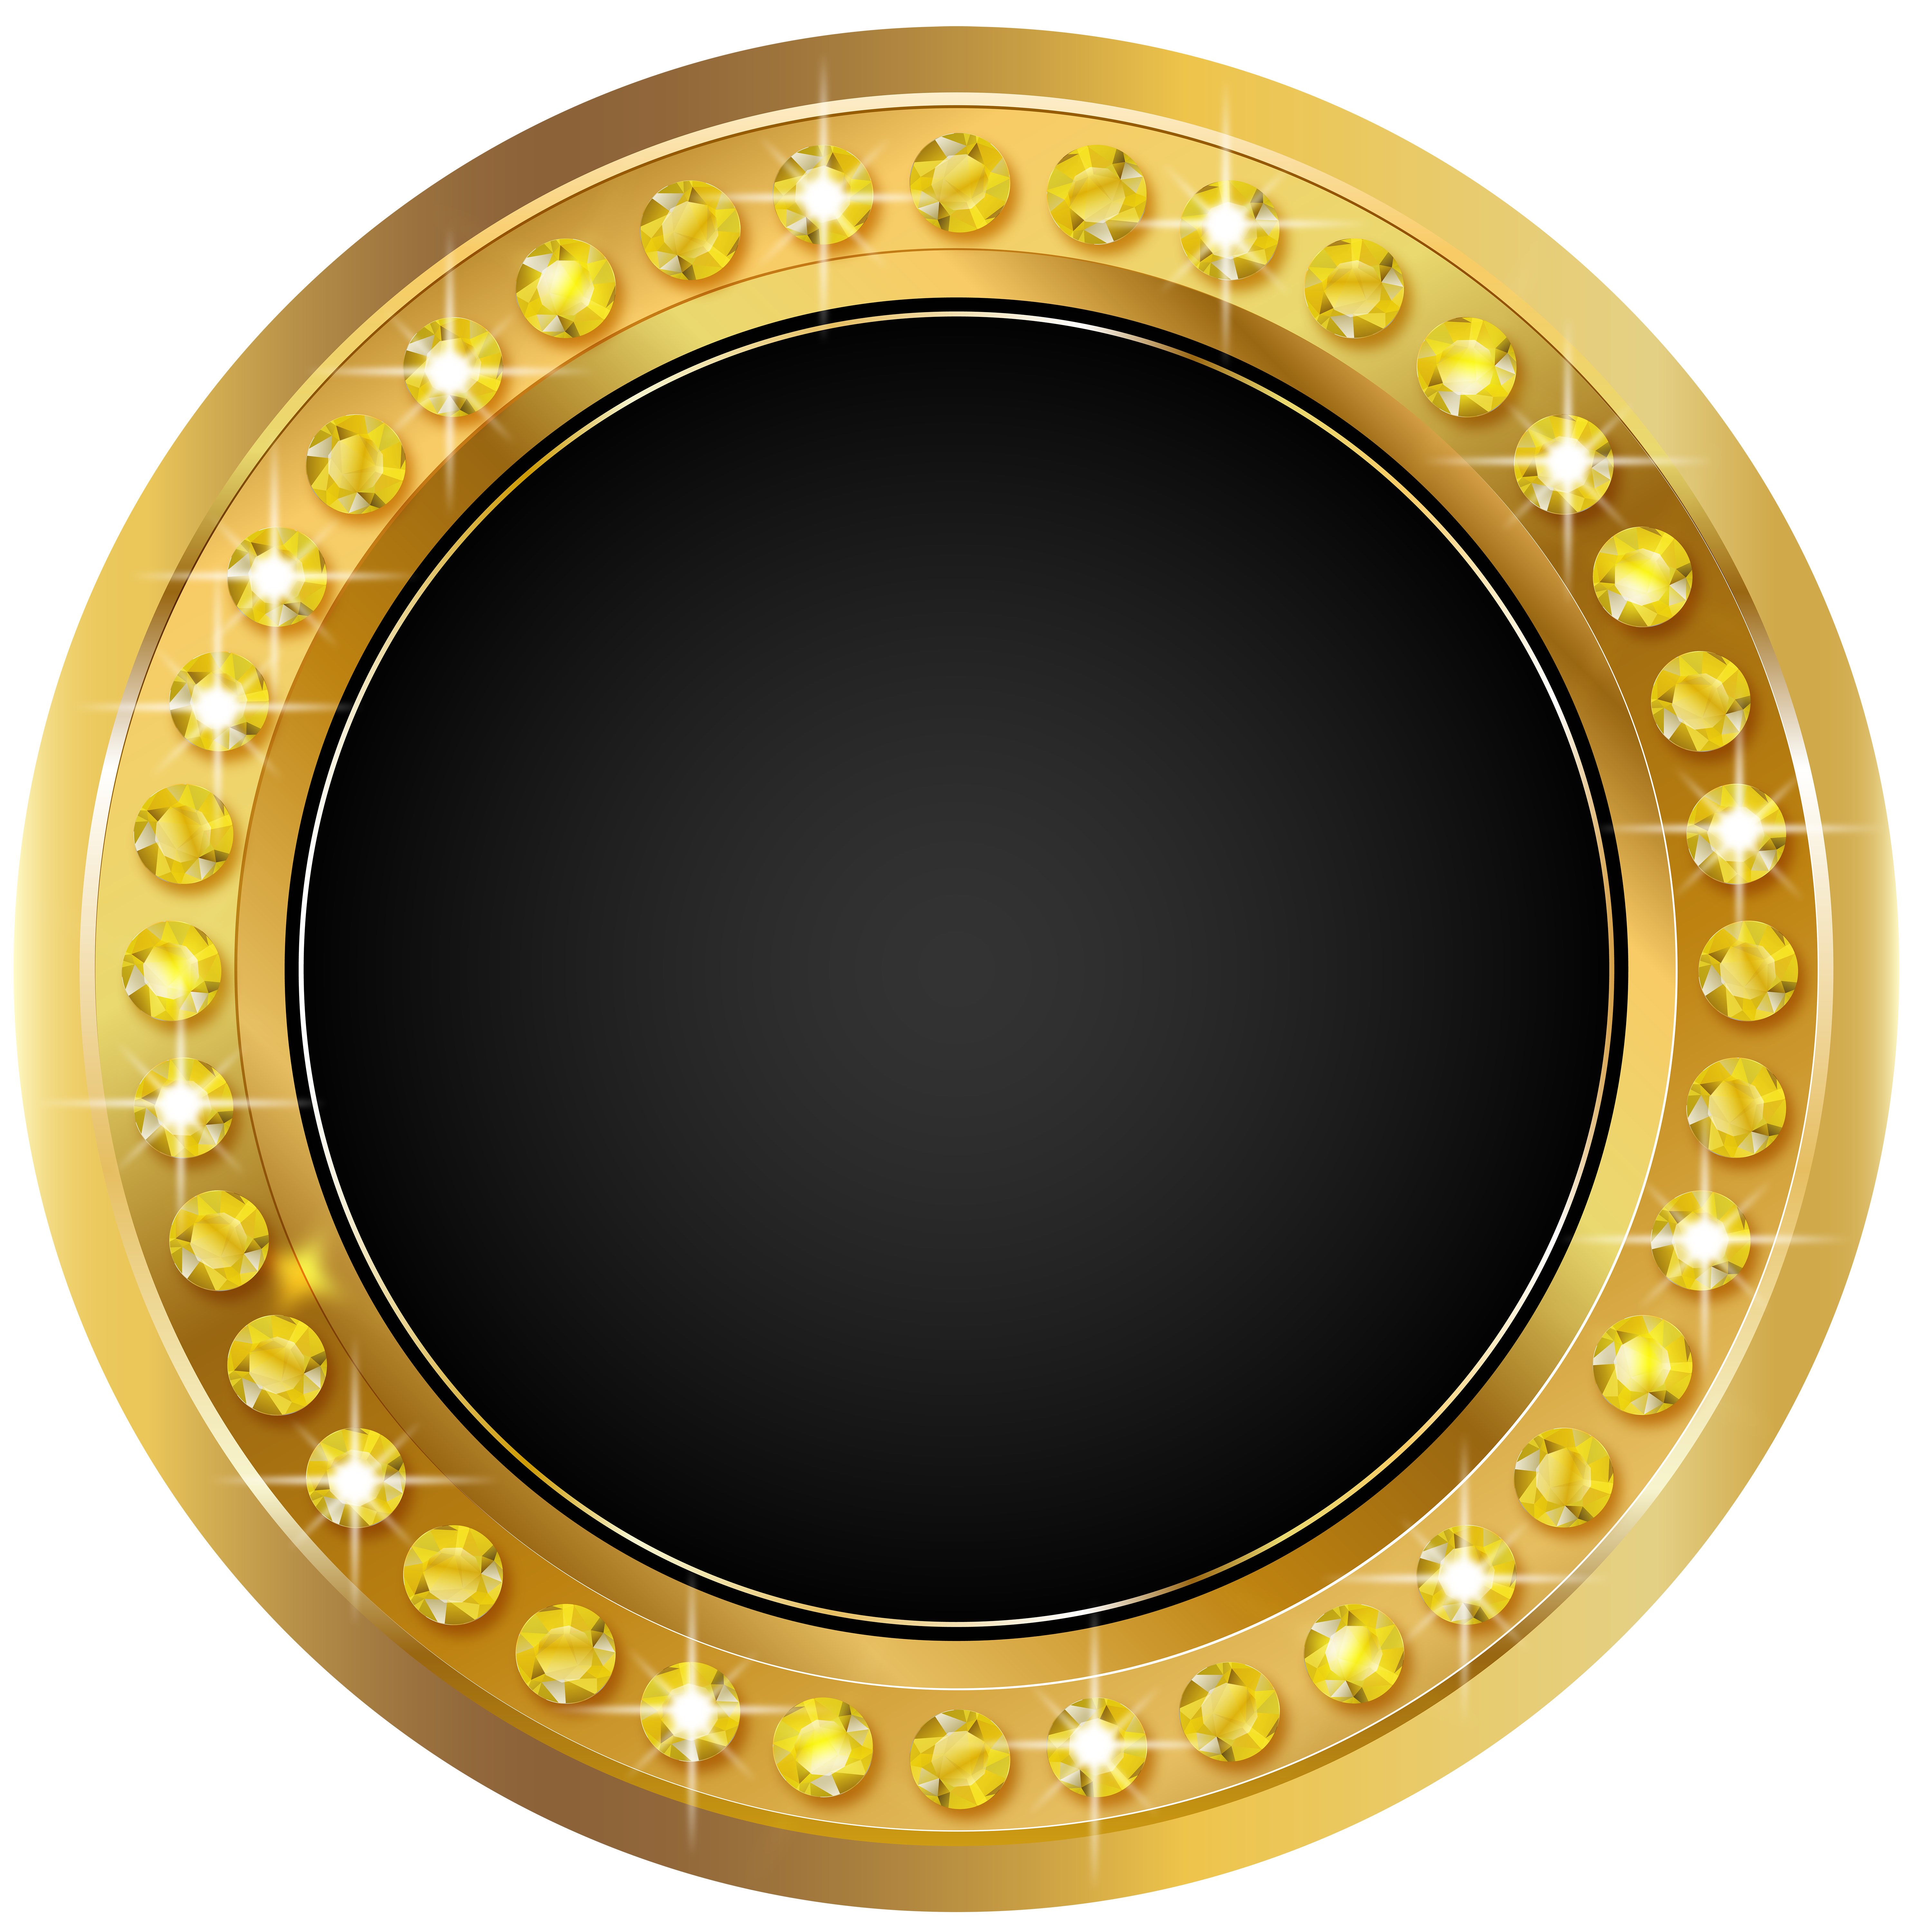 Seal gold black png. Oval clipart golden